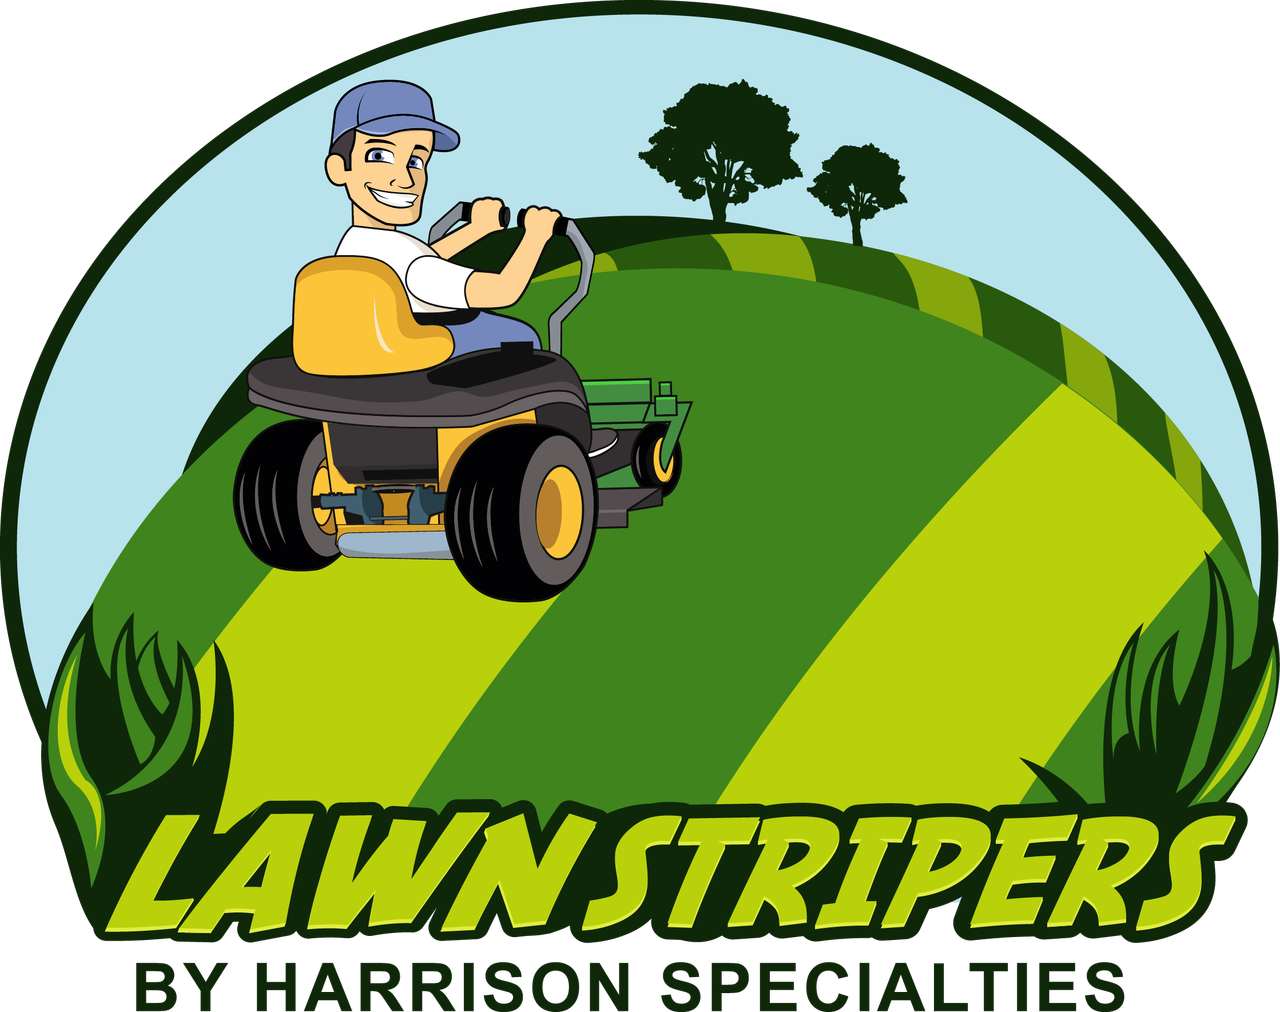 Lawn Striping kit for Toro Z-Master 5000 Series 2013 & 6000 Series 2014 with 60" Turbo Force Deck